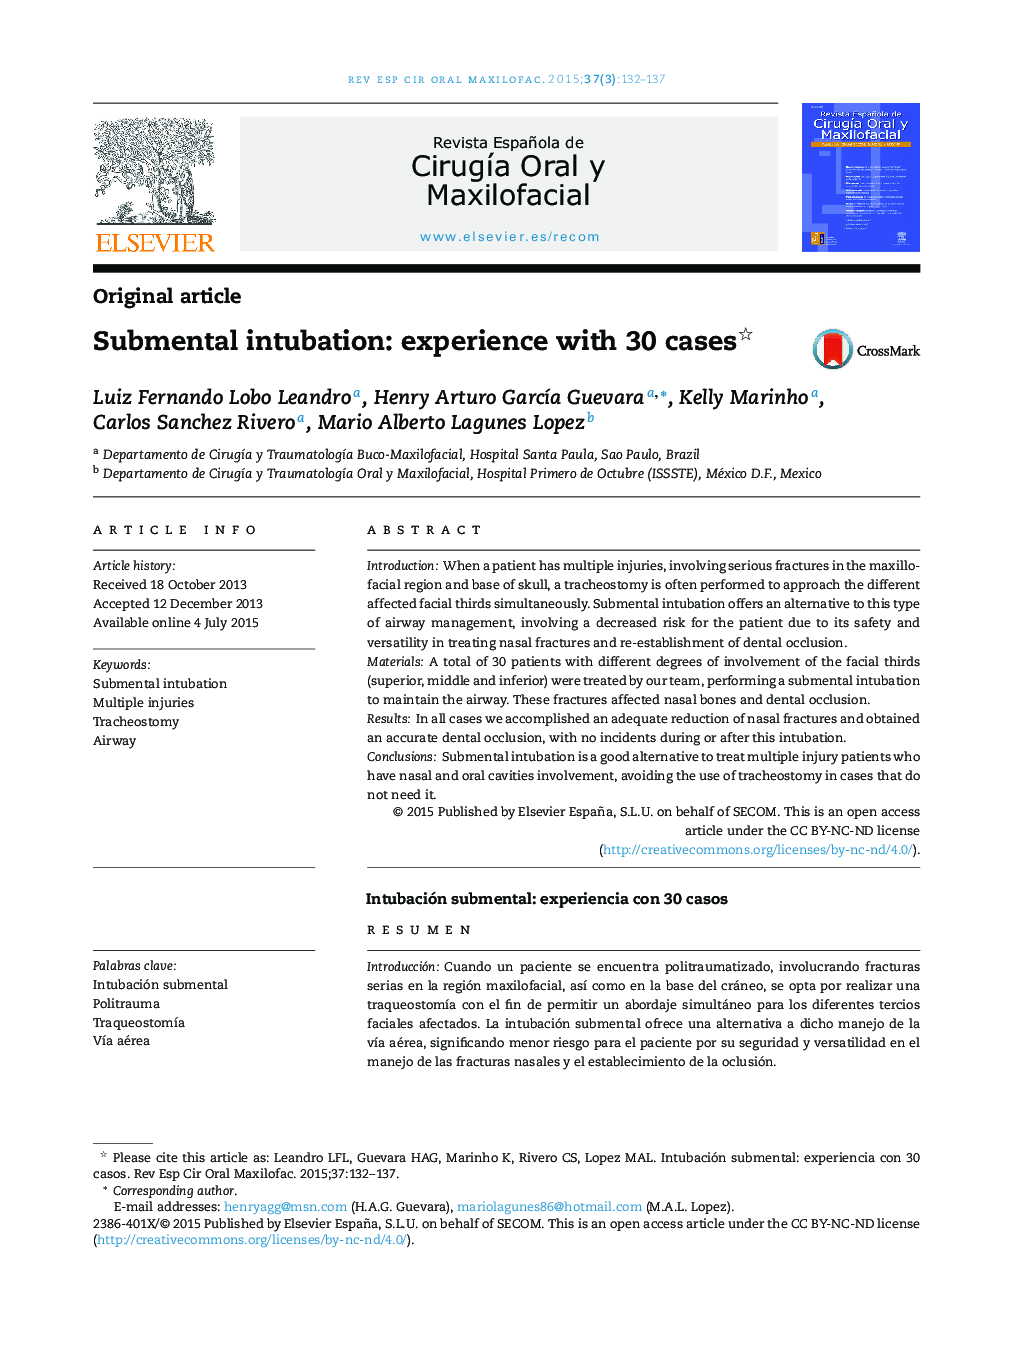 Submental intubation: experience with 30 cases 